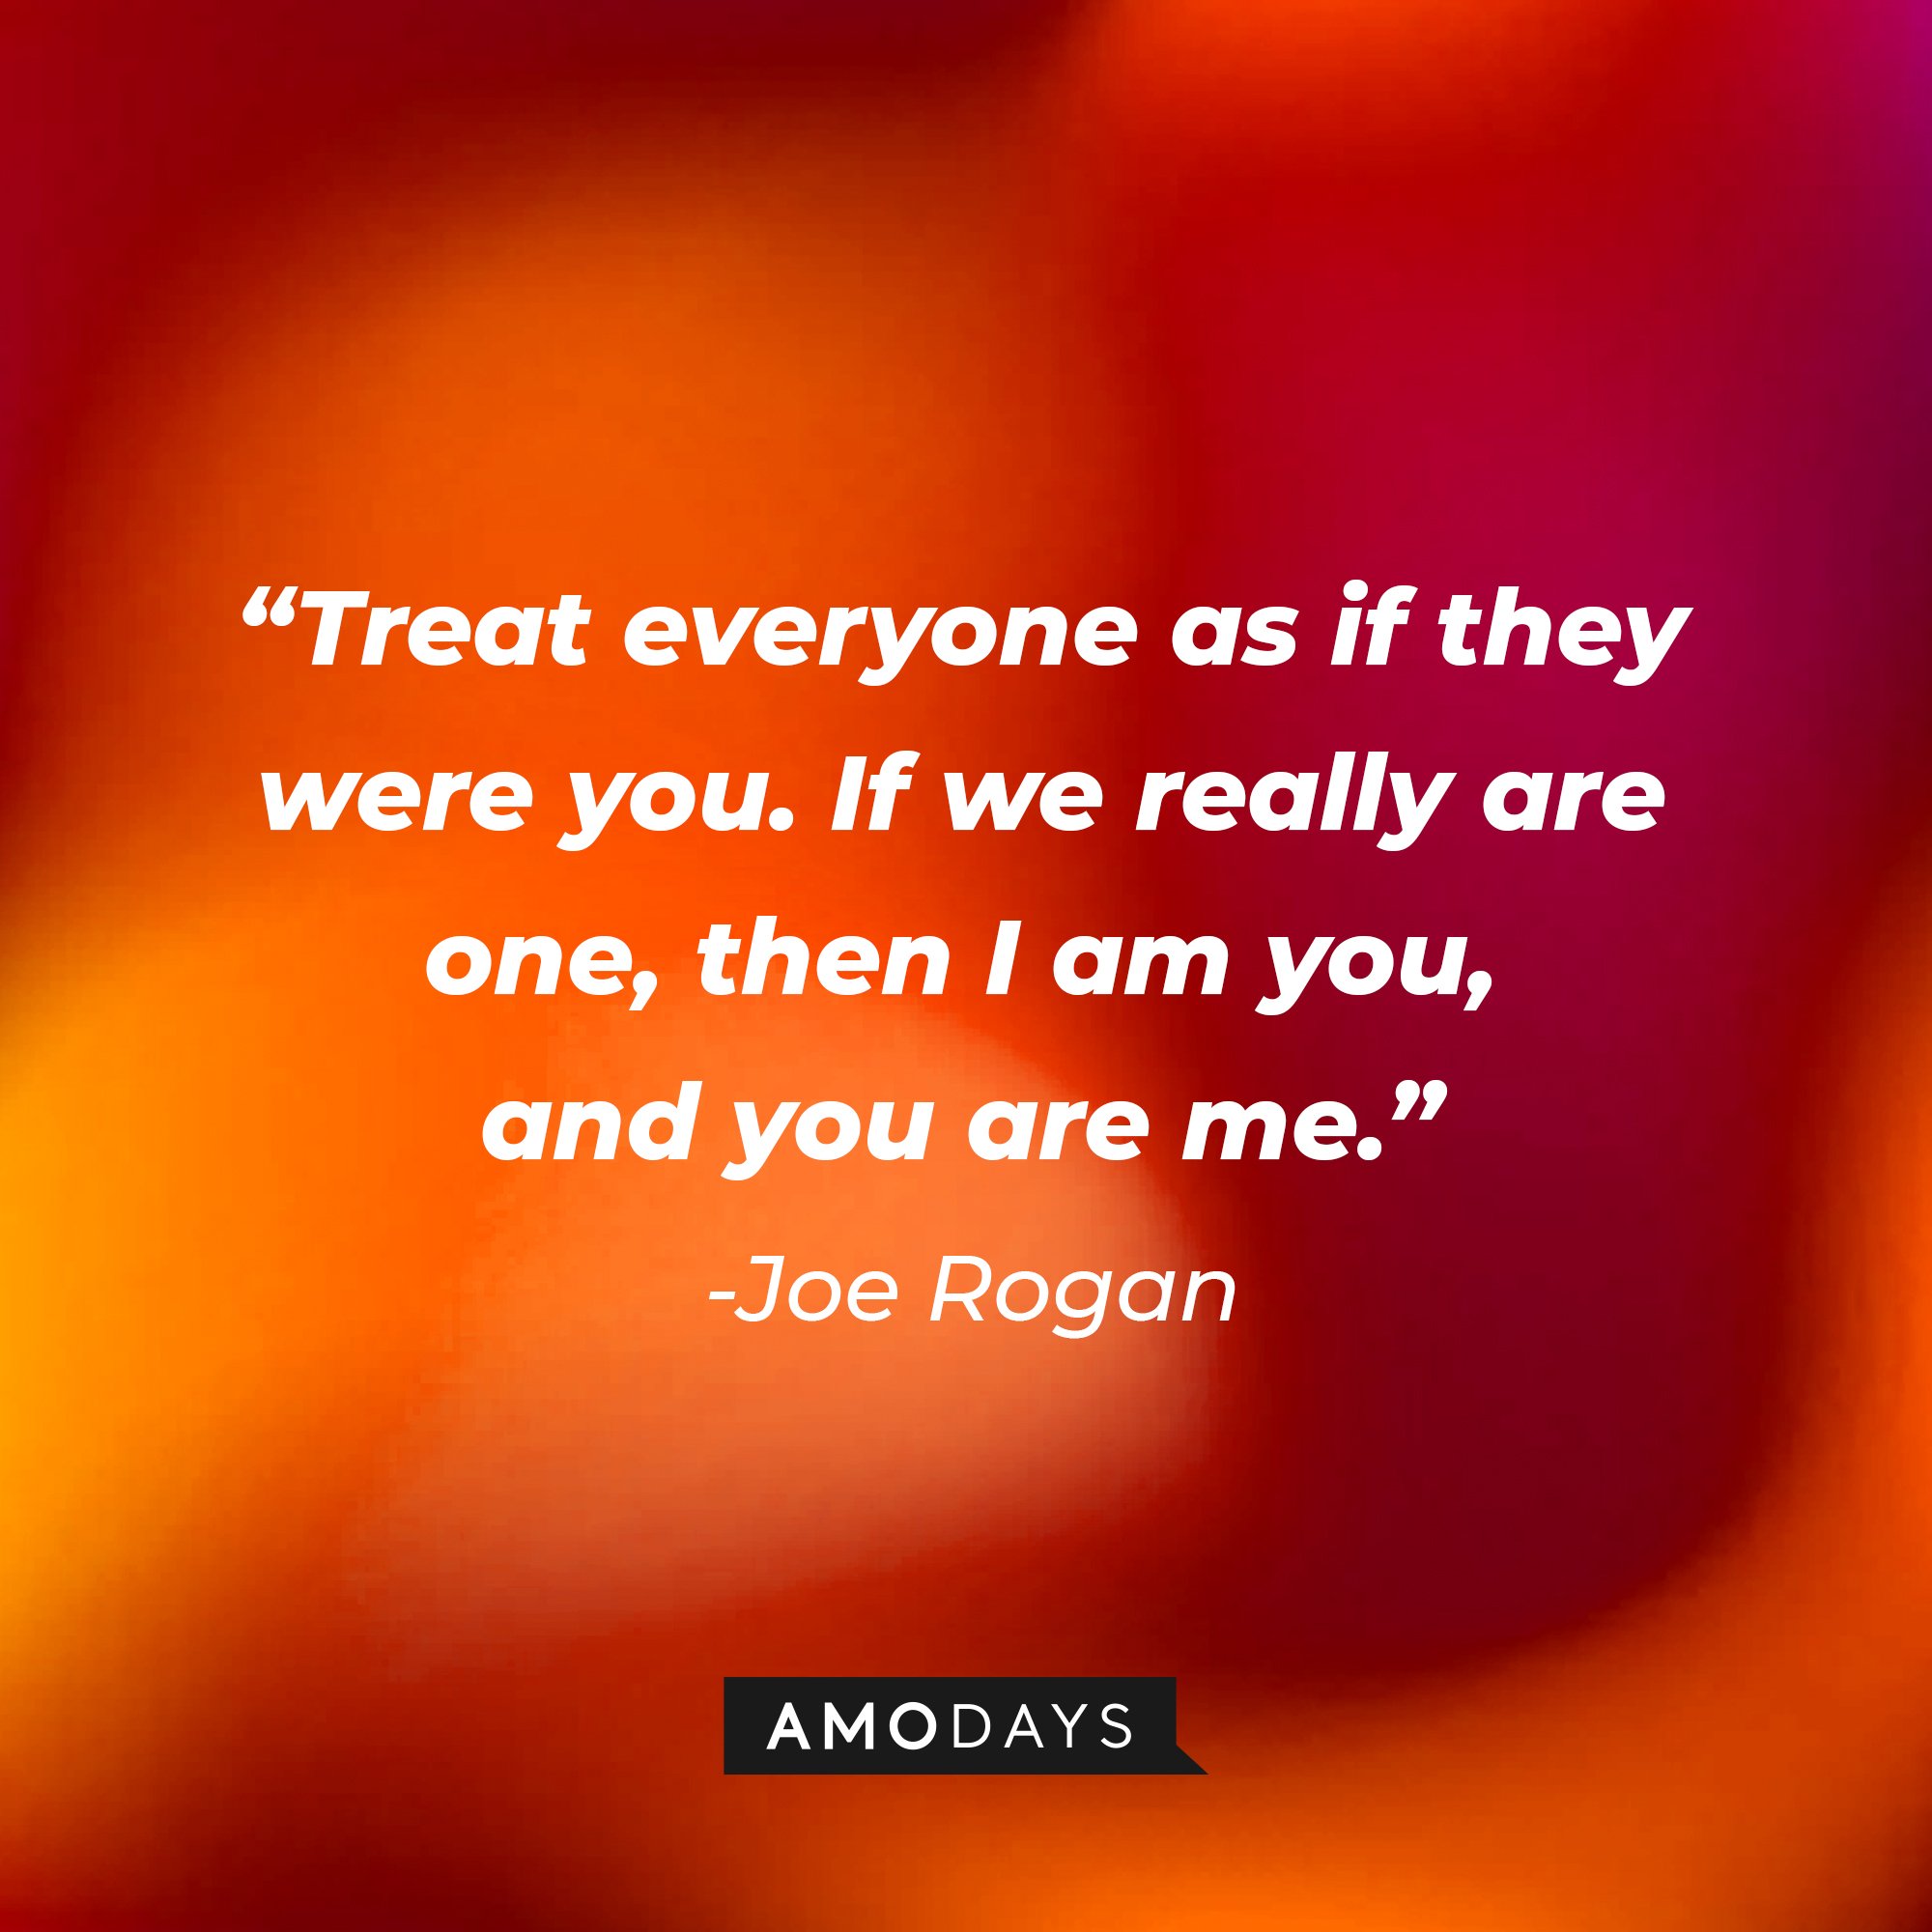 Joe Rogan's quote: "Treat everyone as if they were you. If we really are one, then I am you, and you are me." | Image: AmoDays